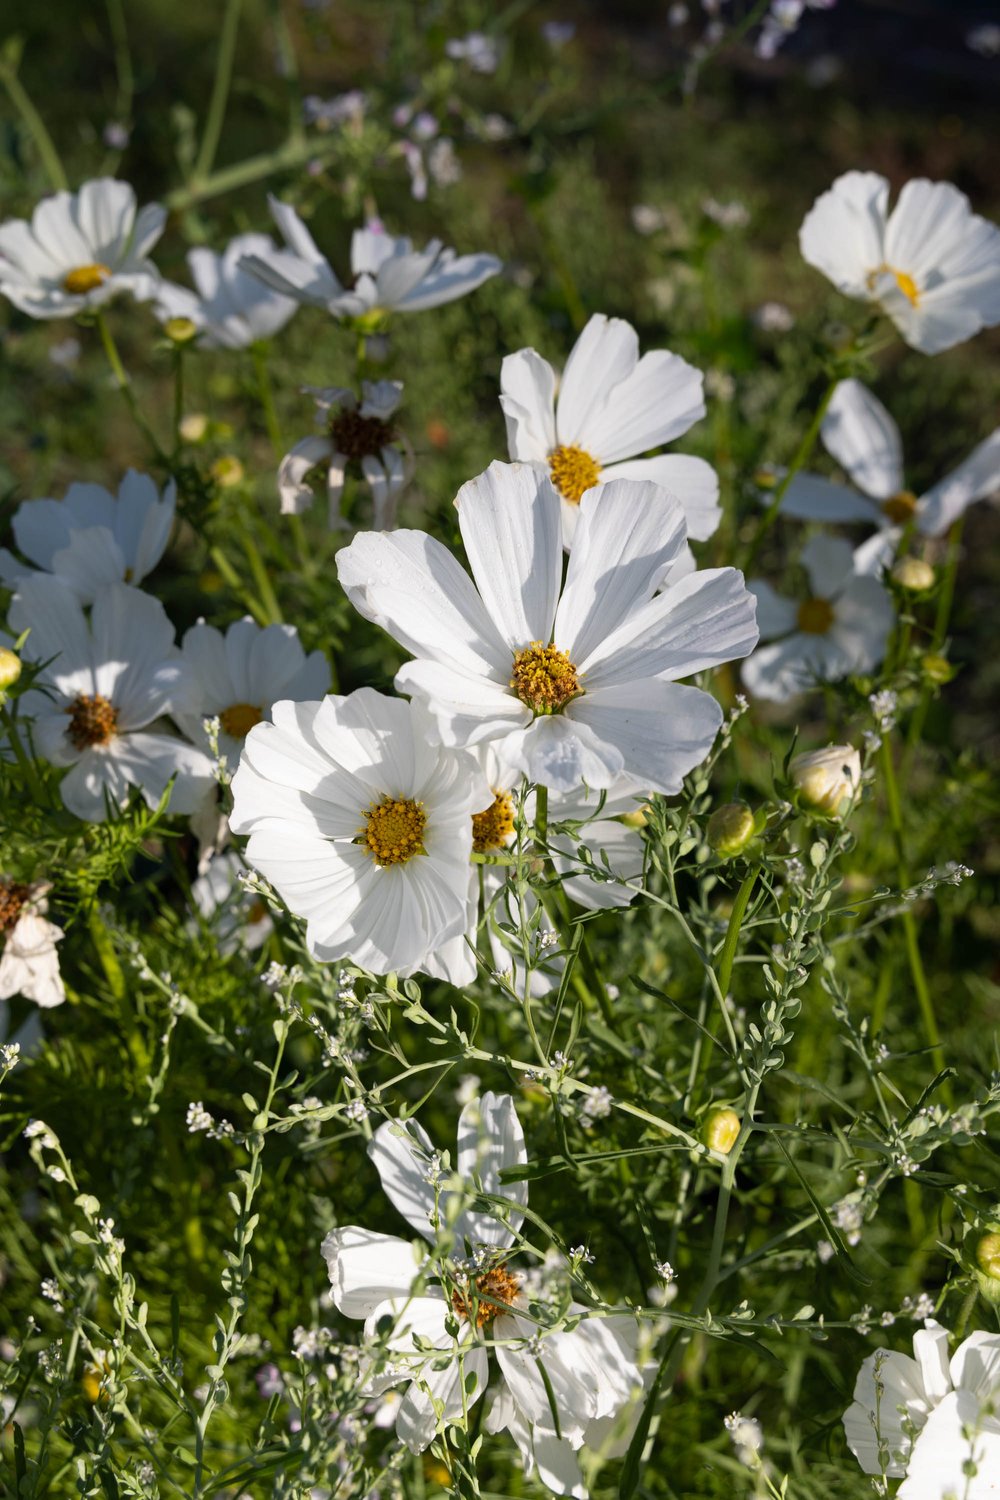 Best Large White Cosmos Seeds grows large pure white cosmos for easy cut flower garden seed12.jpg